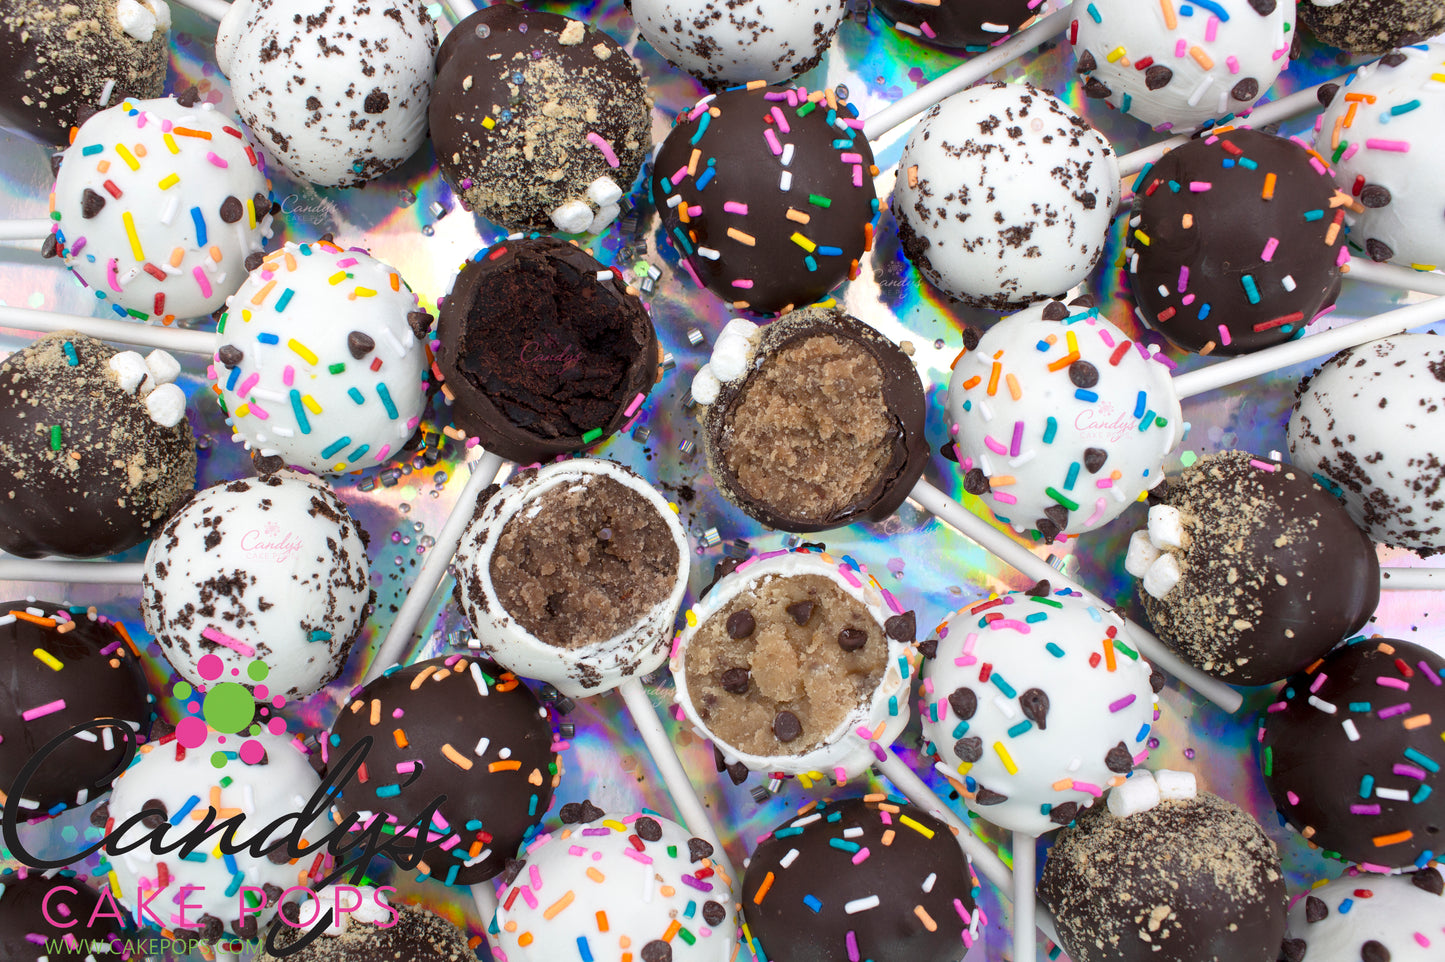 The Chocolate Lover’s Box - Candy's Cake Pops